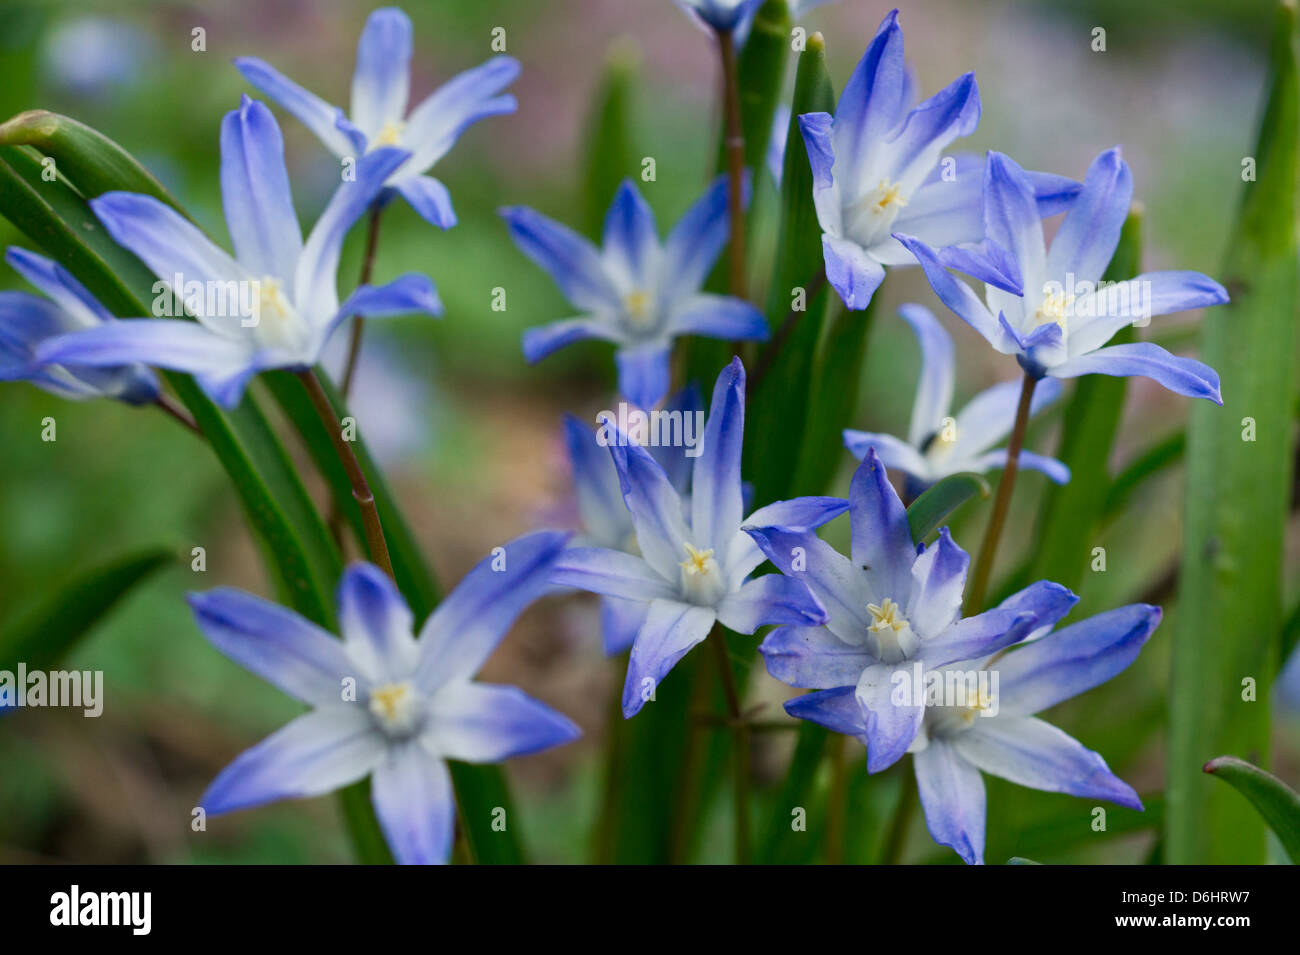 Blue Star Hyacinth flowers in Spring Stock Photo